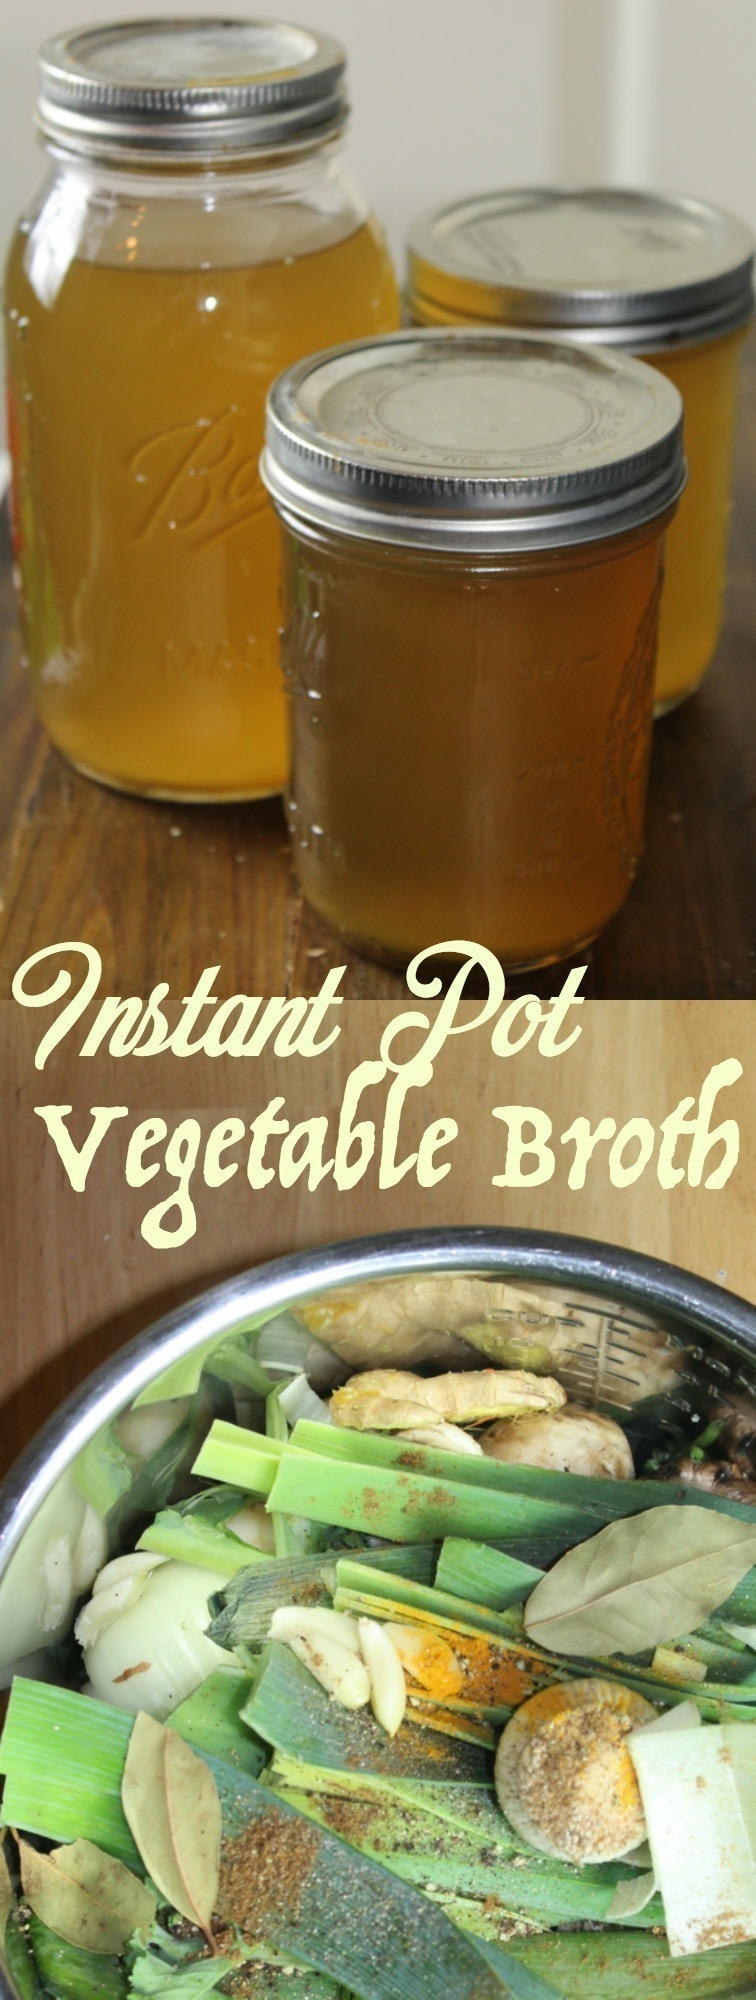 Combine all of your vegetable scraps in the Instant Pot along with a few seasonings to make a rich, homemade vegetable broth from scratch!